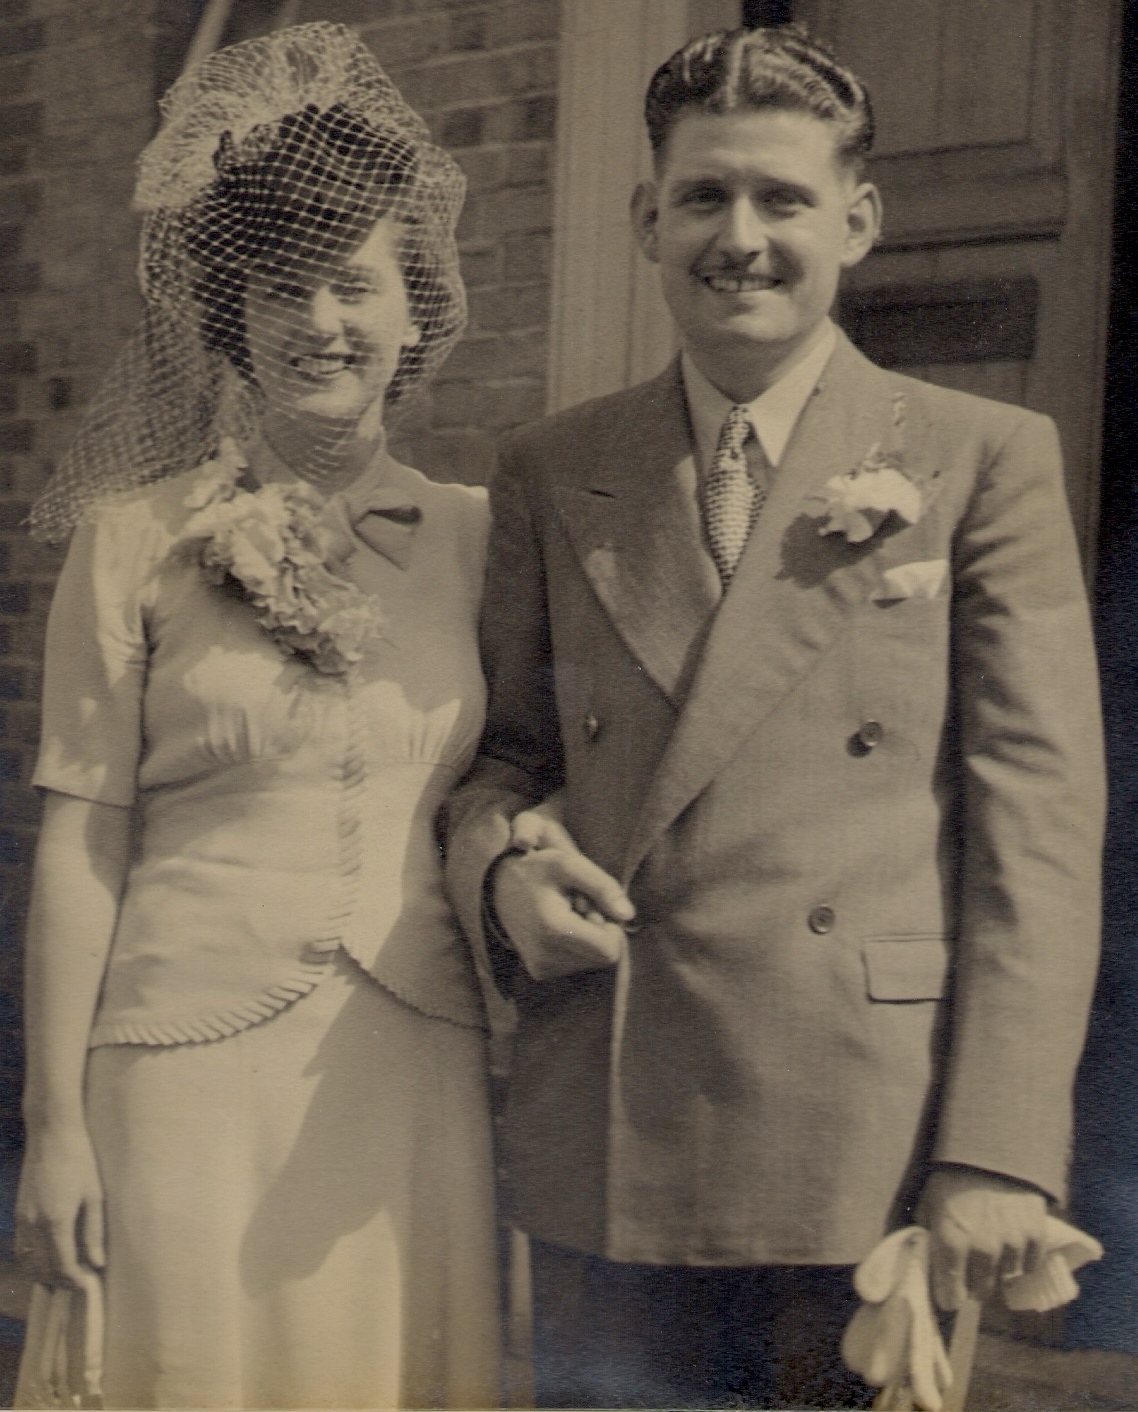 My parents on their wedding day in 1945